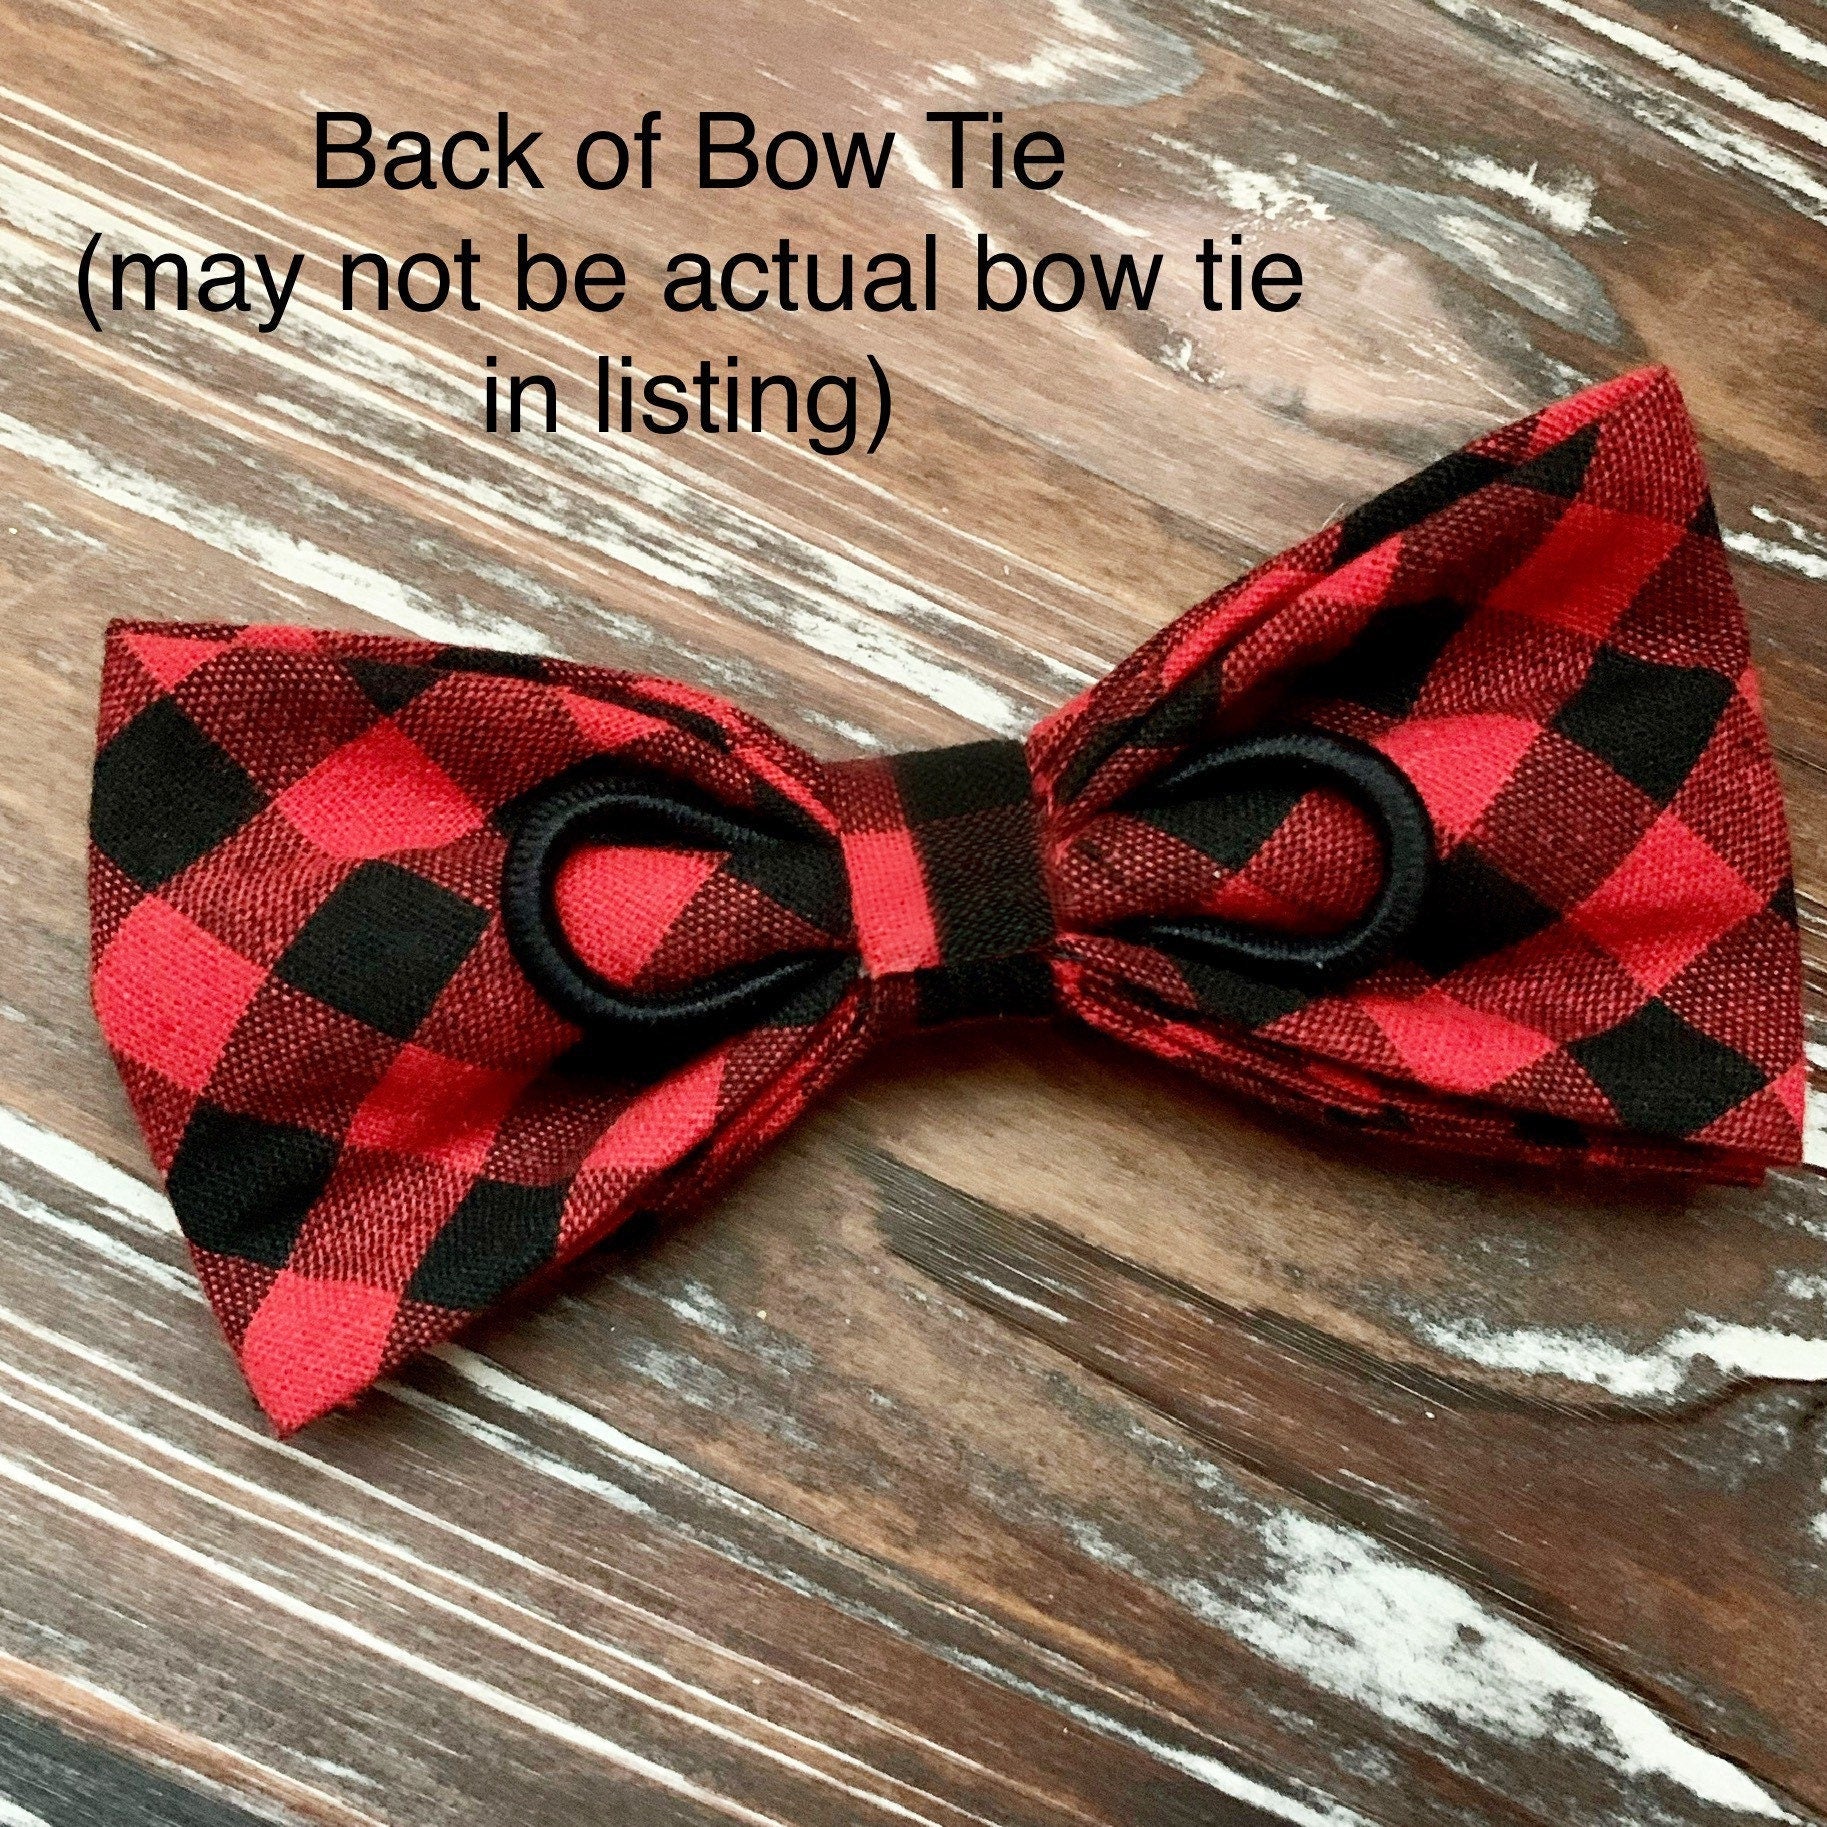 Green & Orange Plaid Bow Tie for Dog and Cat Collar